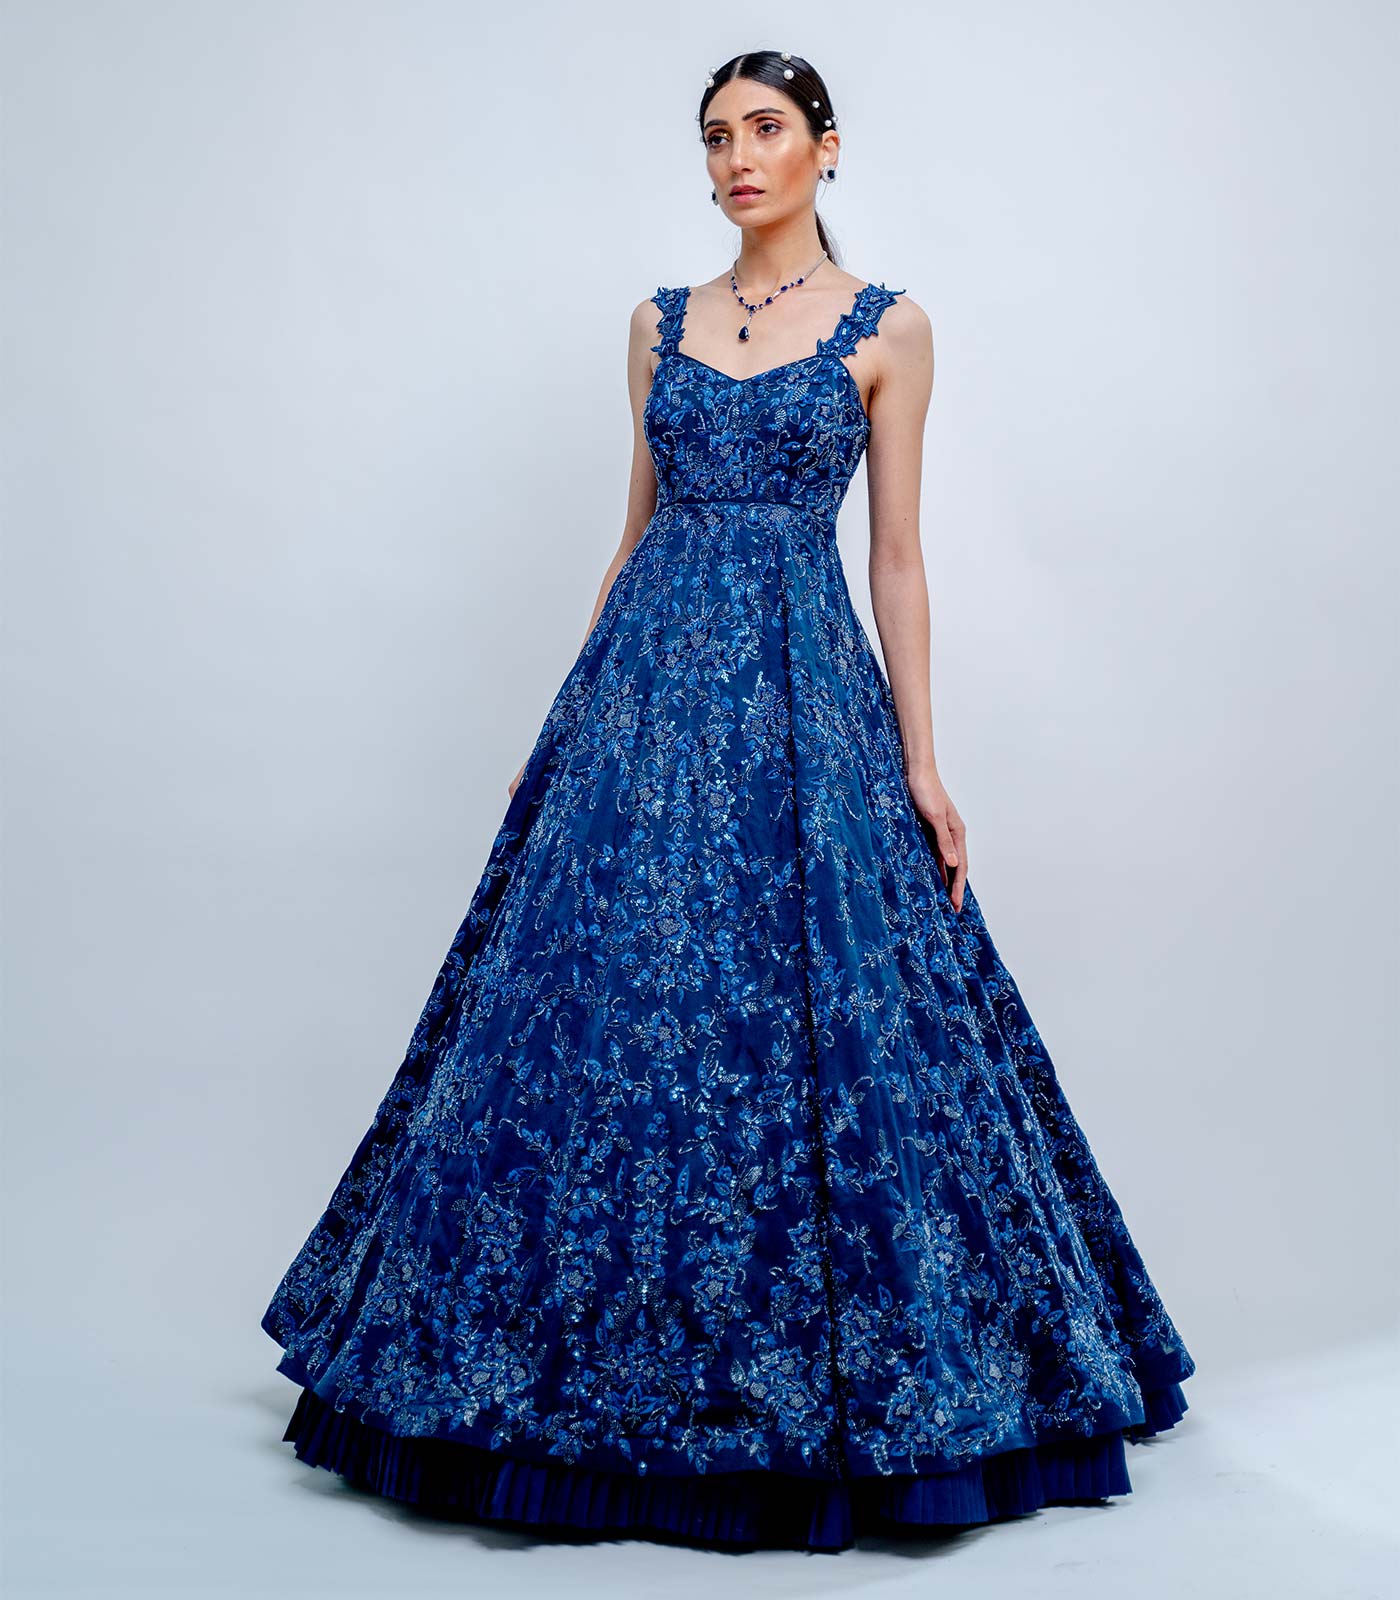 Sartoriale Floral Motifs Embroidered Gown | Blue, Floral, Matte Satin  Crepe, Wide V, Sleeveless | Gowns, Embroidered gown, Reception bride